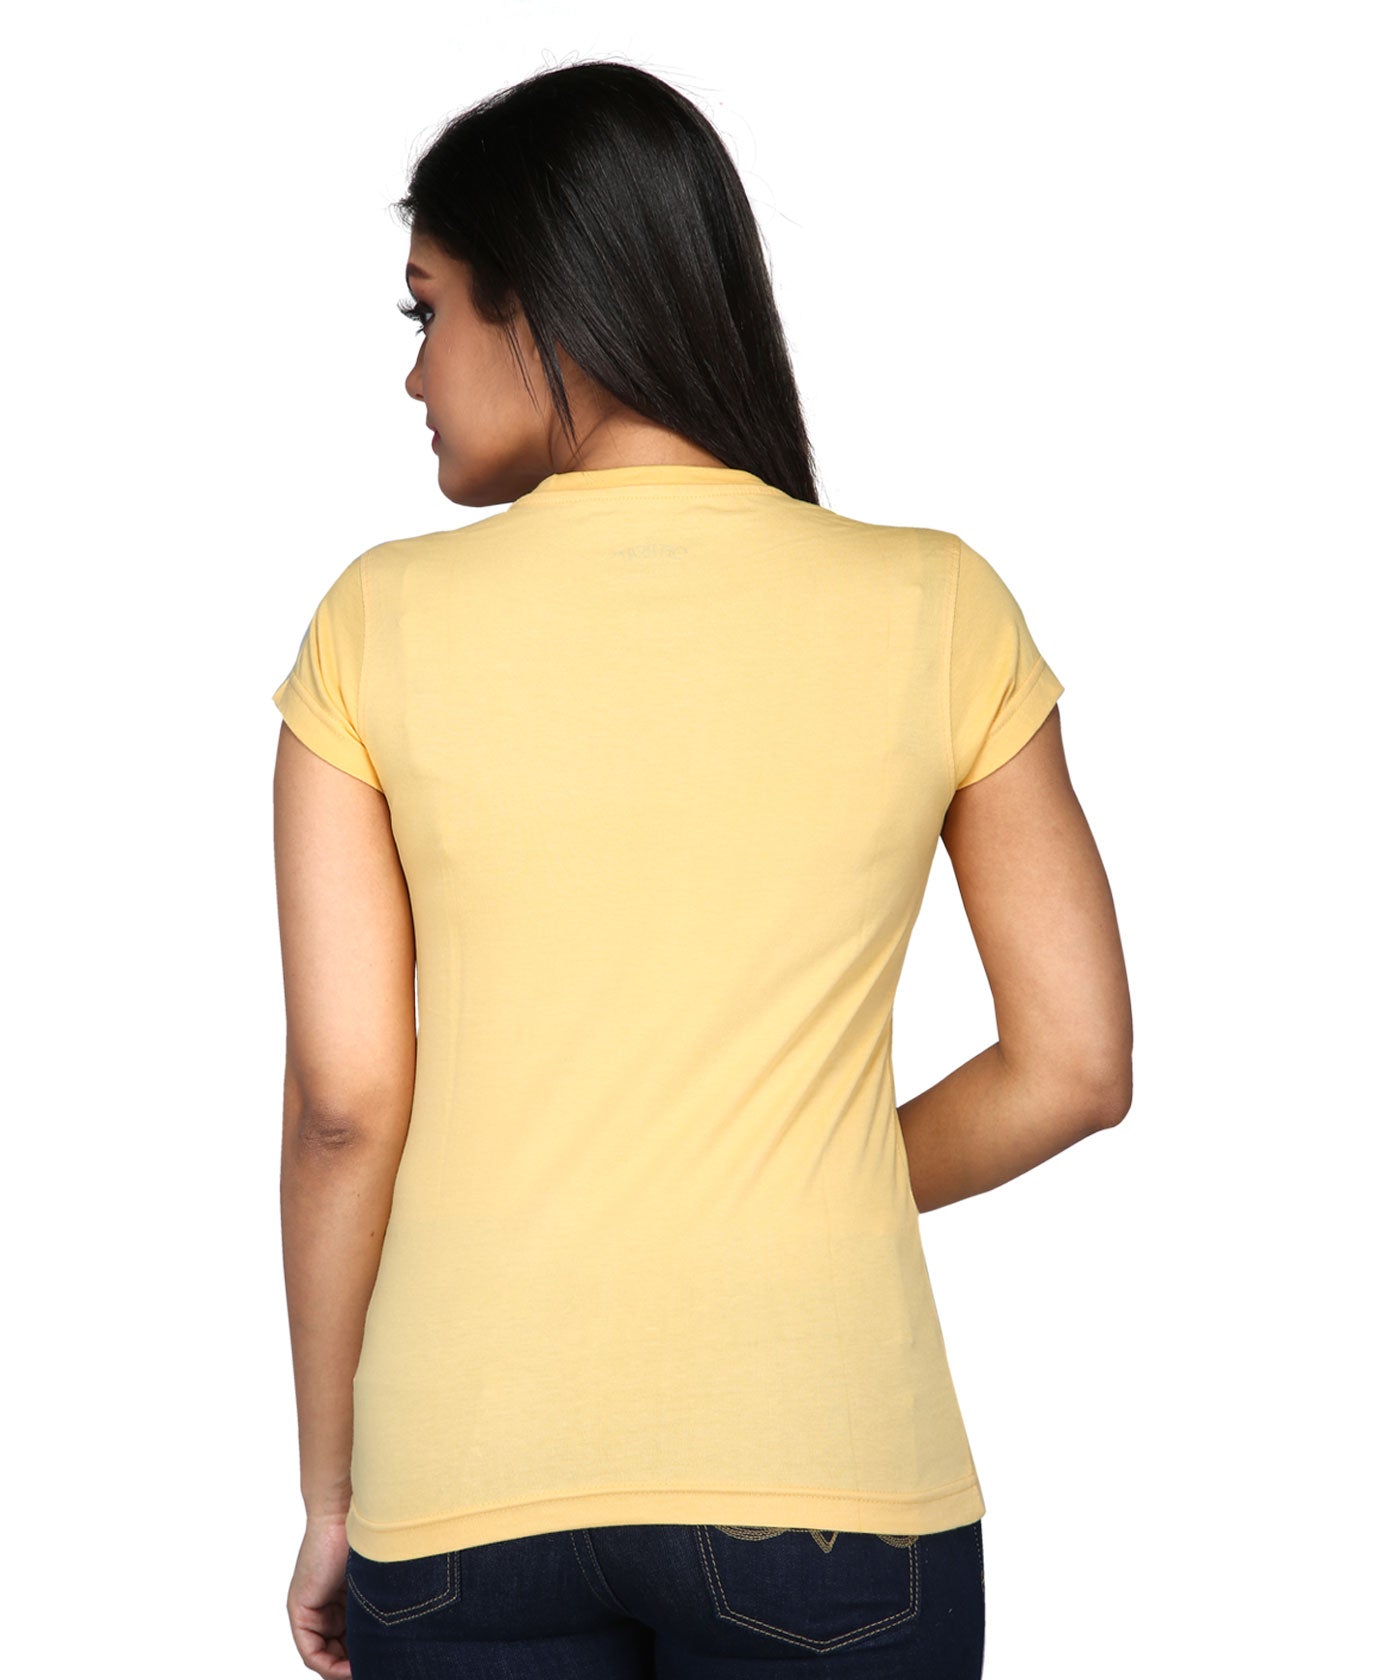 Border With Leaf - Block Print Tees for Women - Golden Yellow